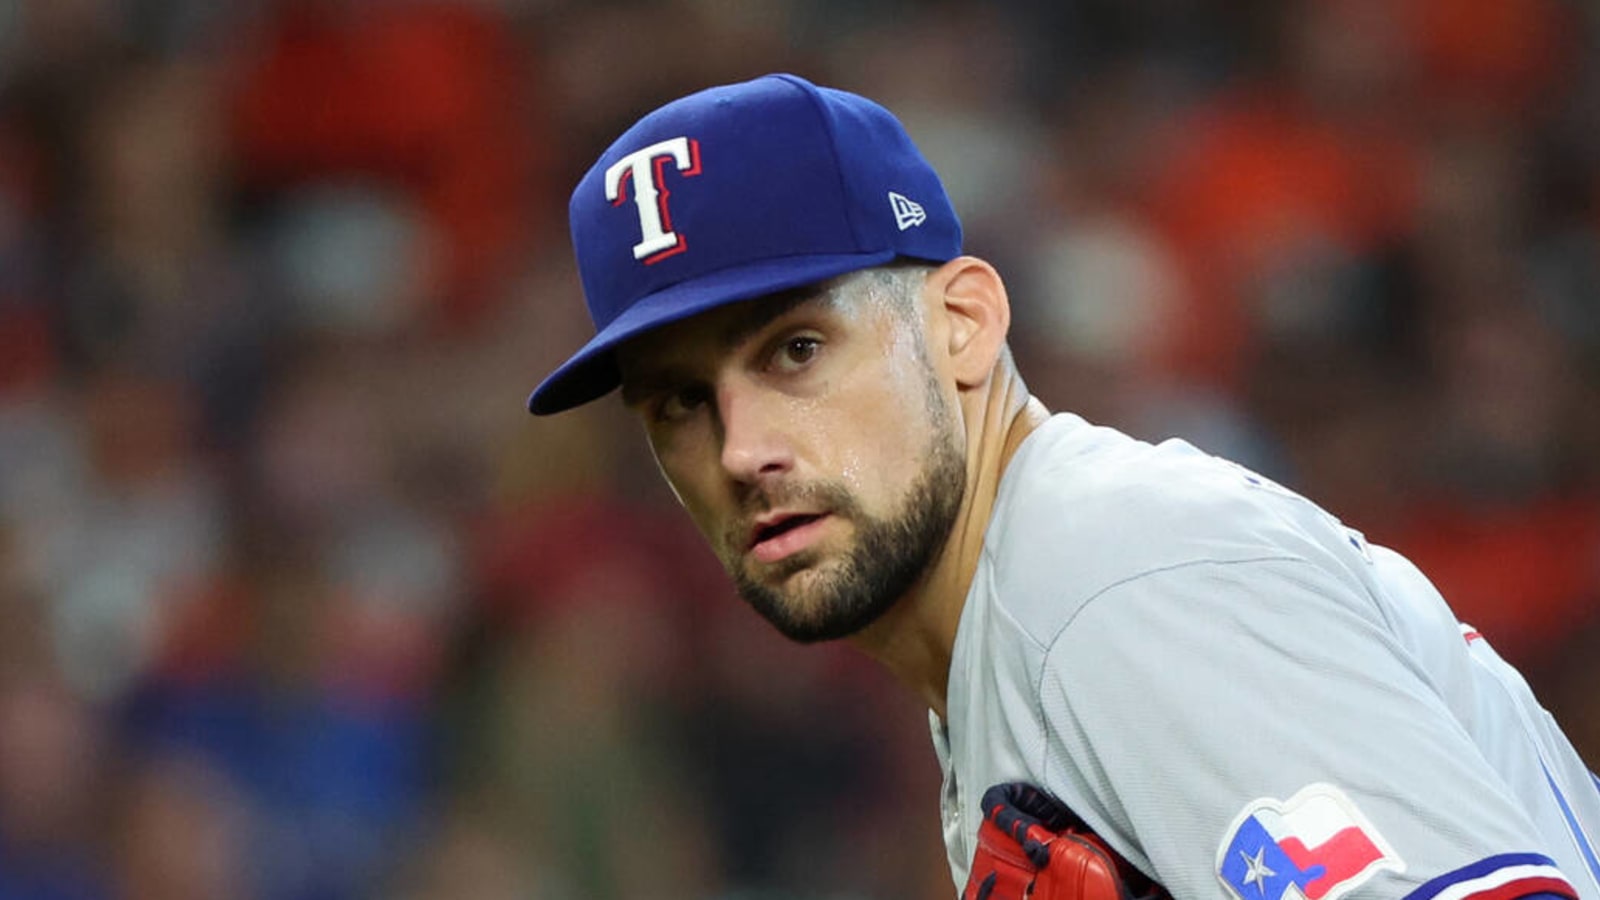 Rangers hold on for 5-4 win over Astros